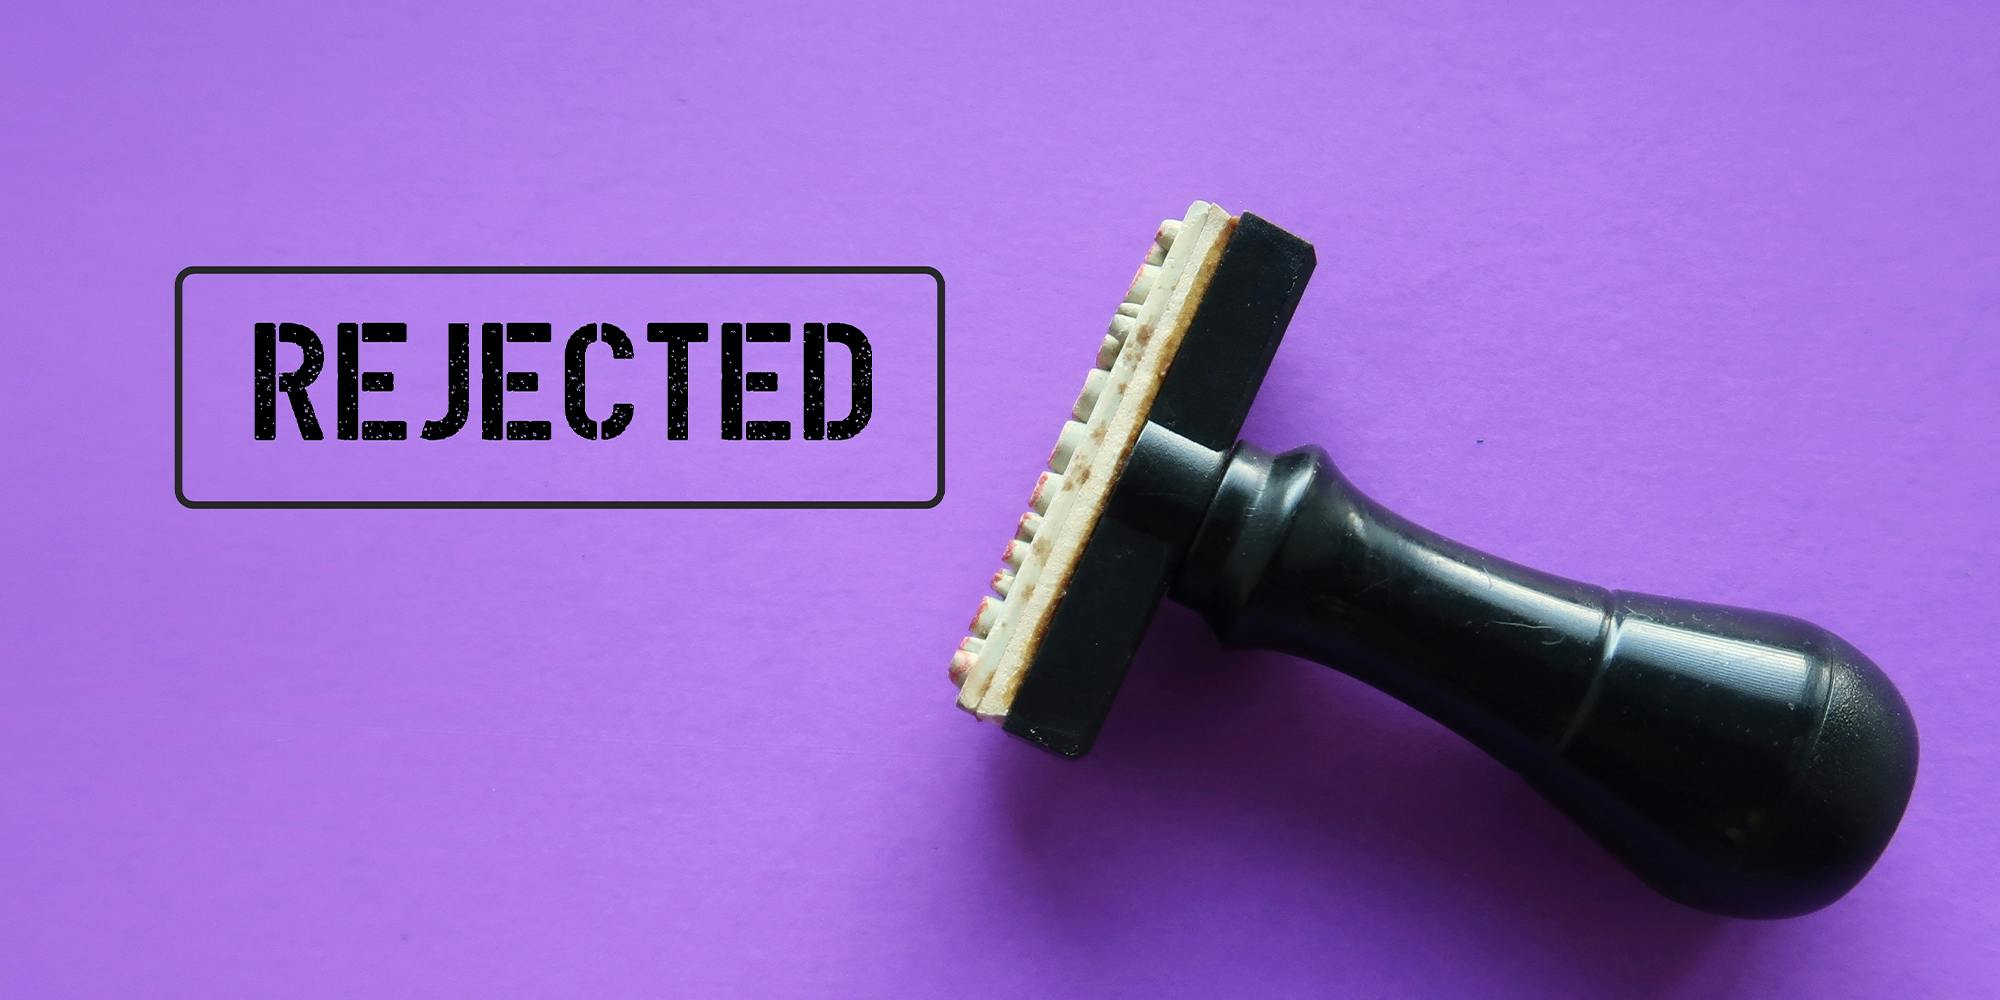 Rubber stamp with stamp words REJECTED on purple background, means refuse to agree to request, not given approval or acceptance to work or offer